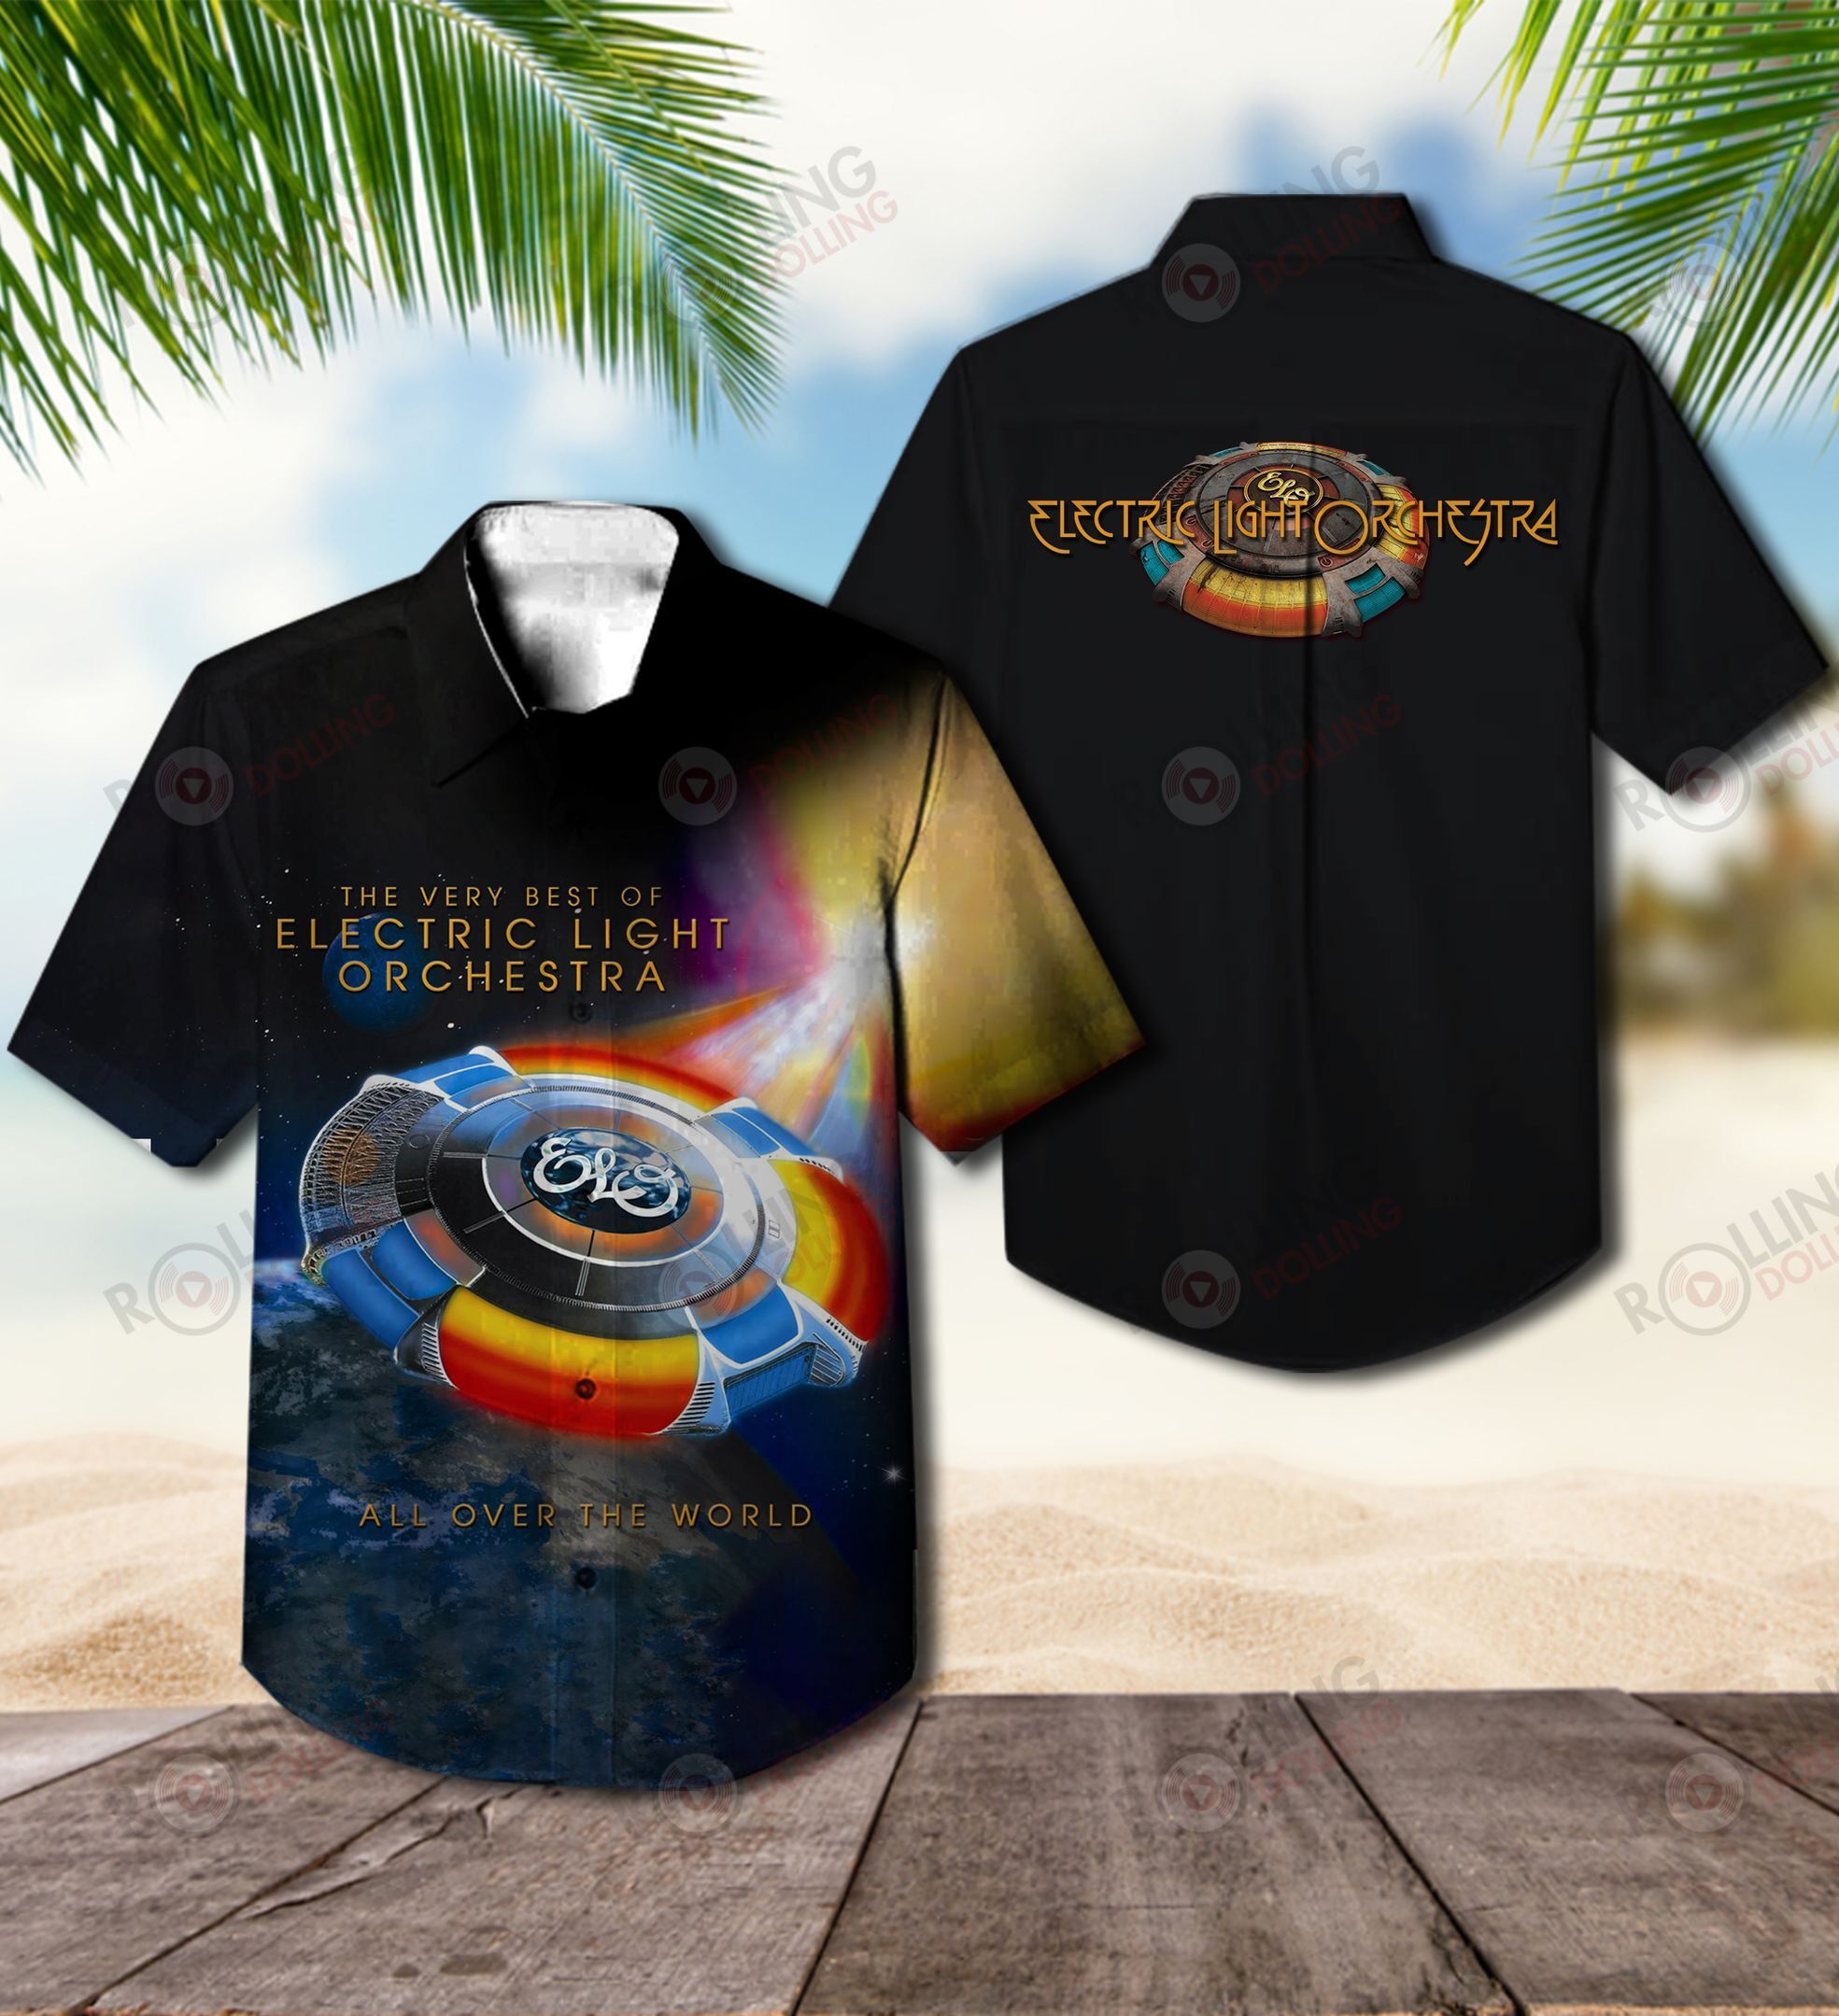 The Hawaiian Shirt is a popular shirt that is worn by Rock band fans 5